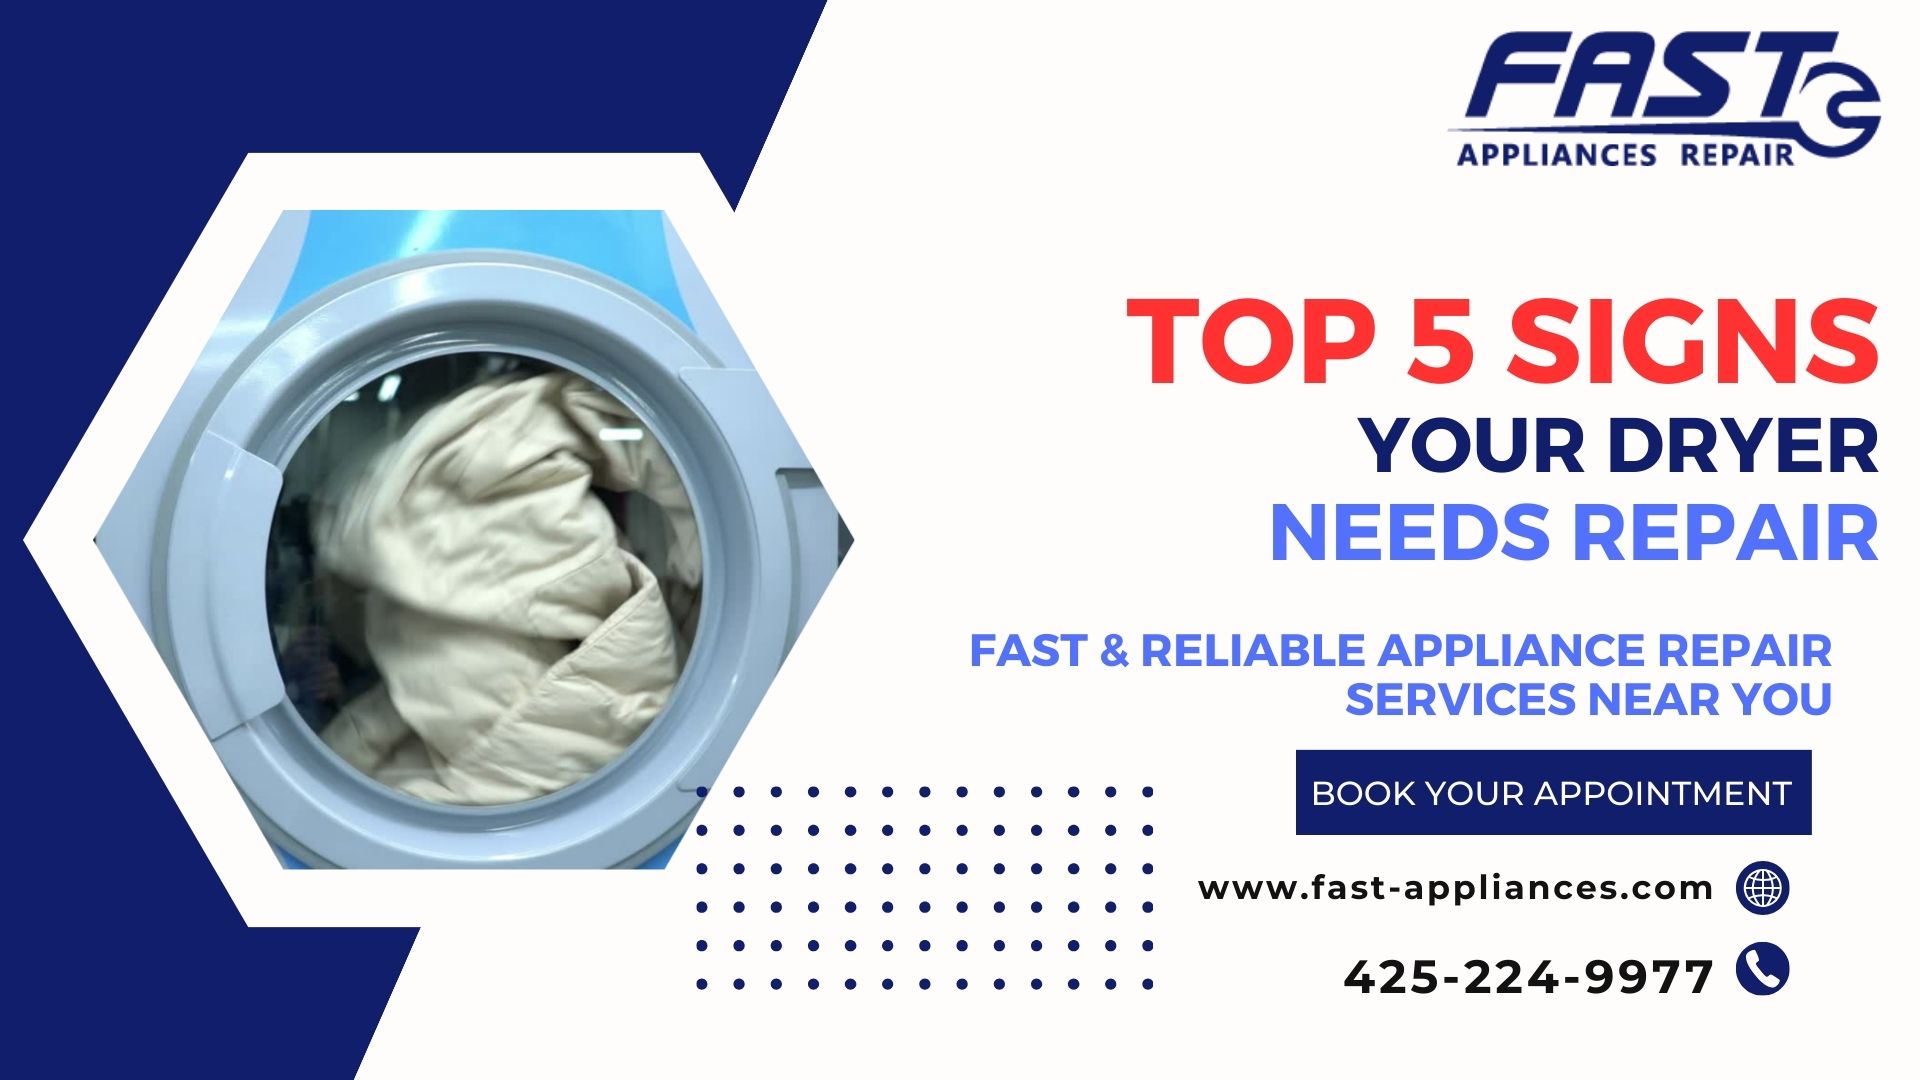 Top 5 Signs of Dryer Appliance Repair Services